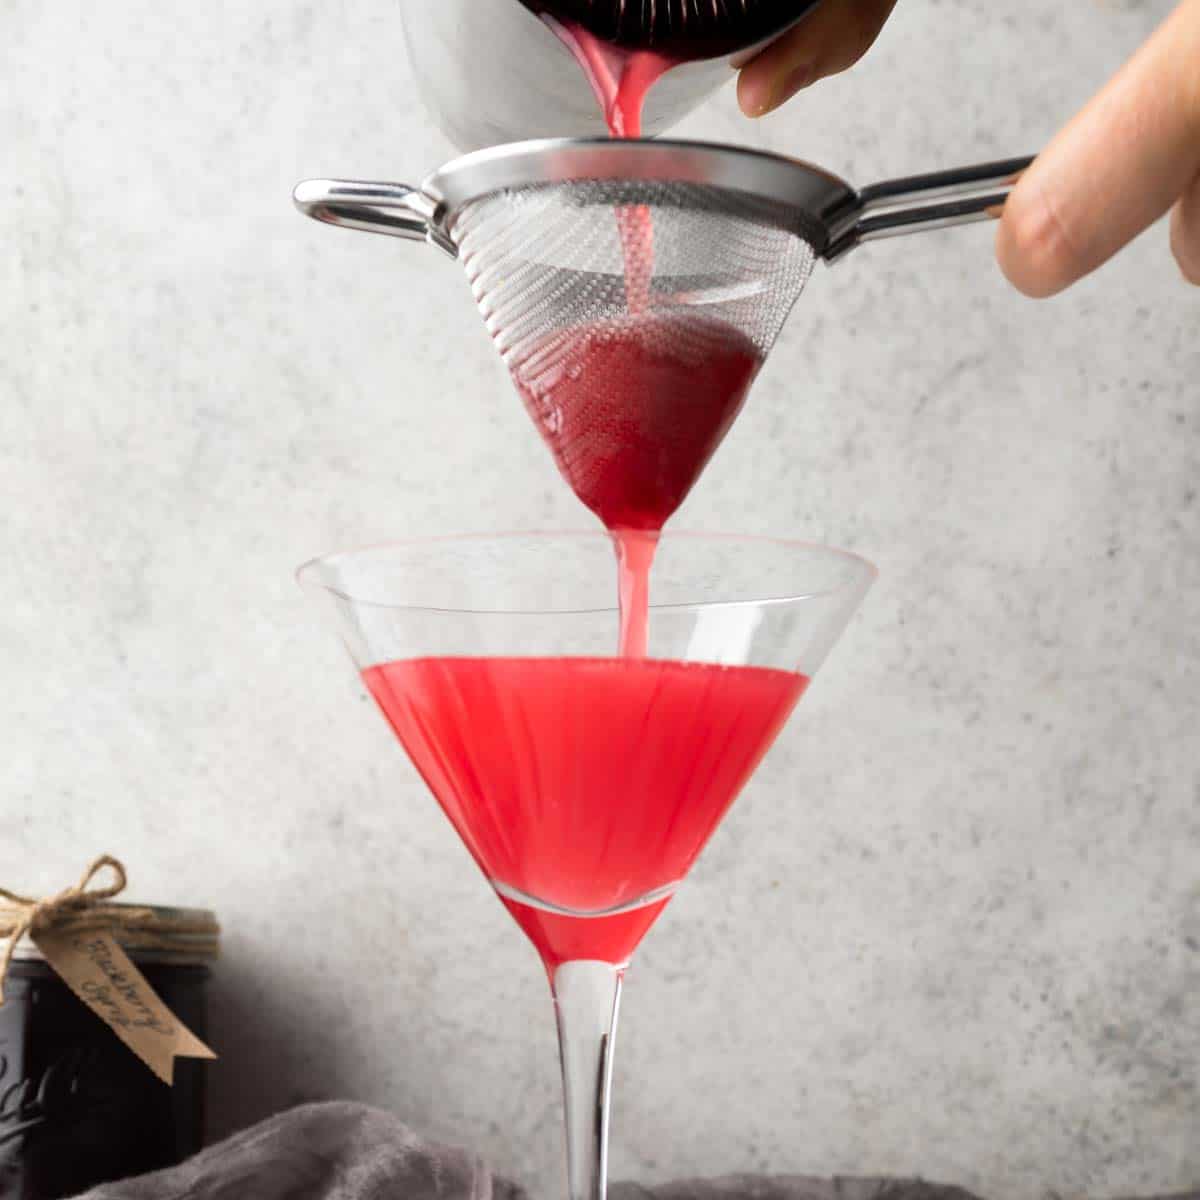 Double straining a cocktail into a martini glass